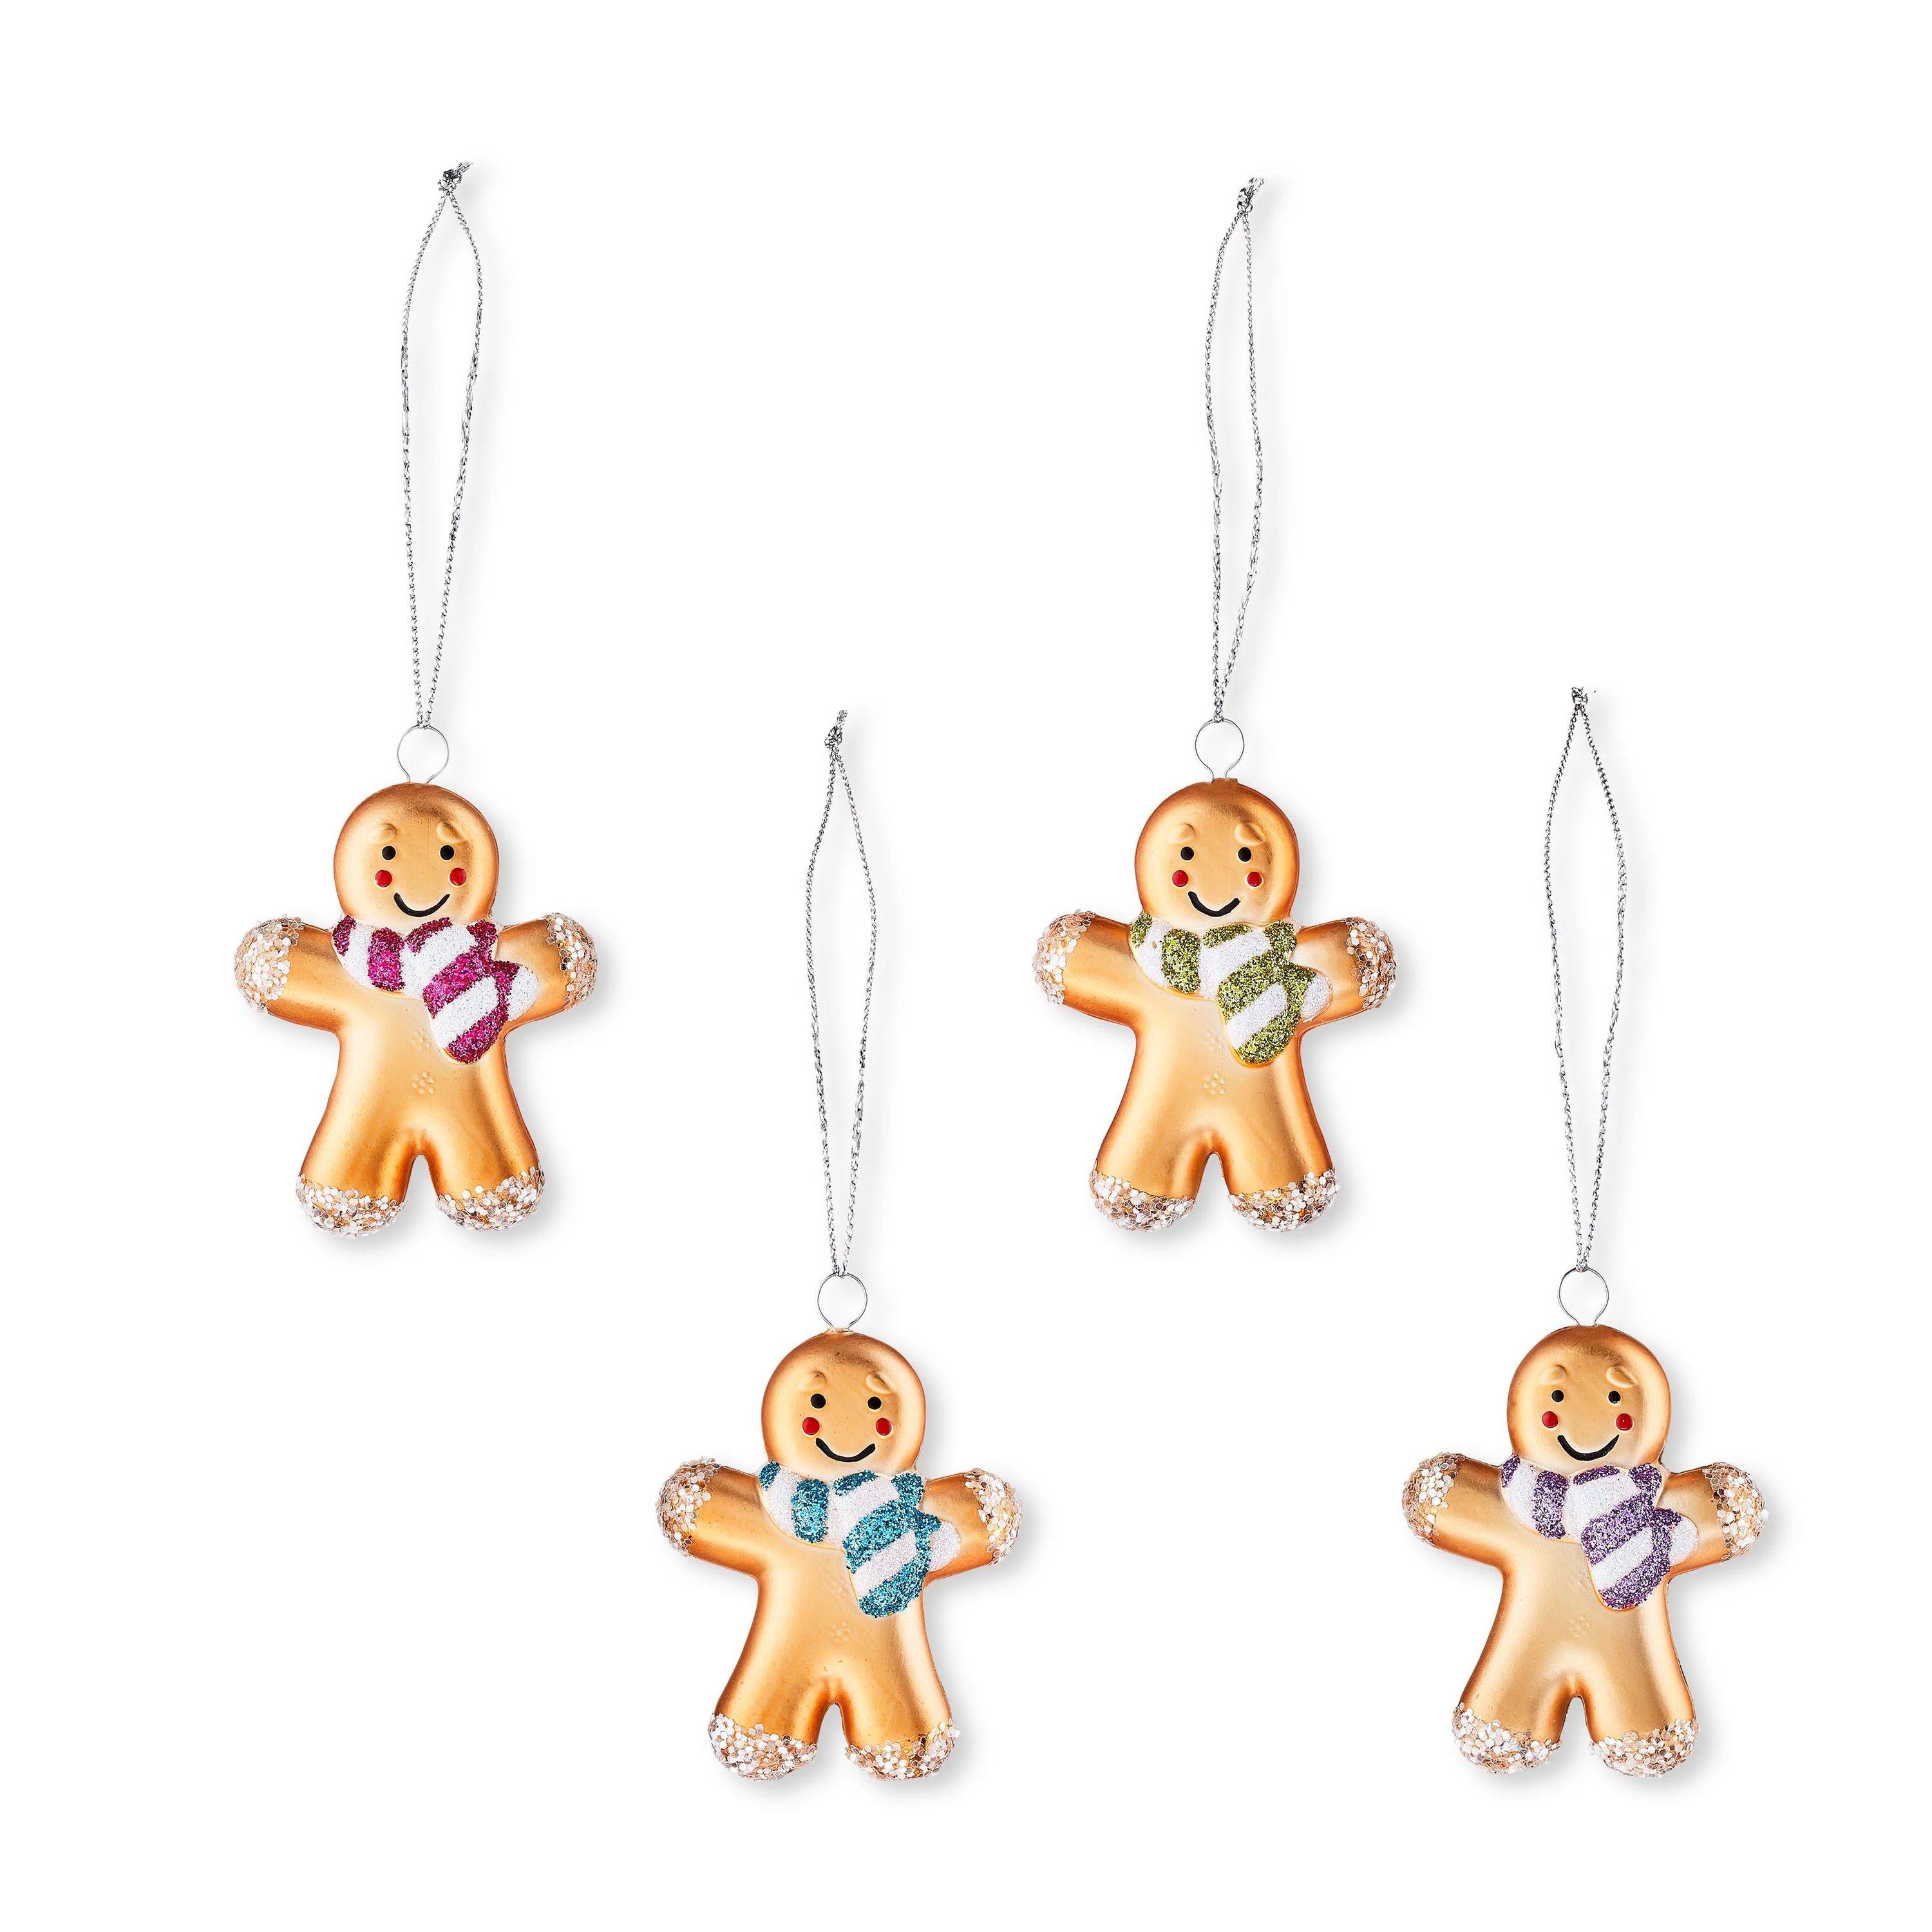 Gingerbread Man Mini Decorative Christmas Ornaments, Multicolor, 4 Count, by Holiday Time | Walmart (US)